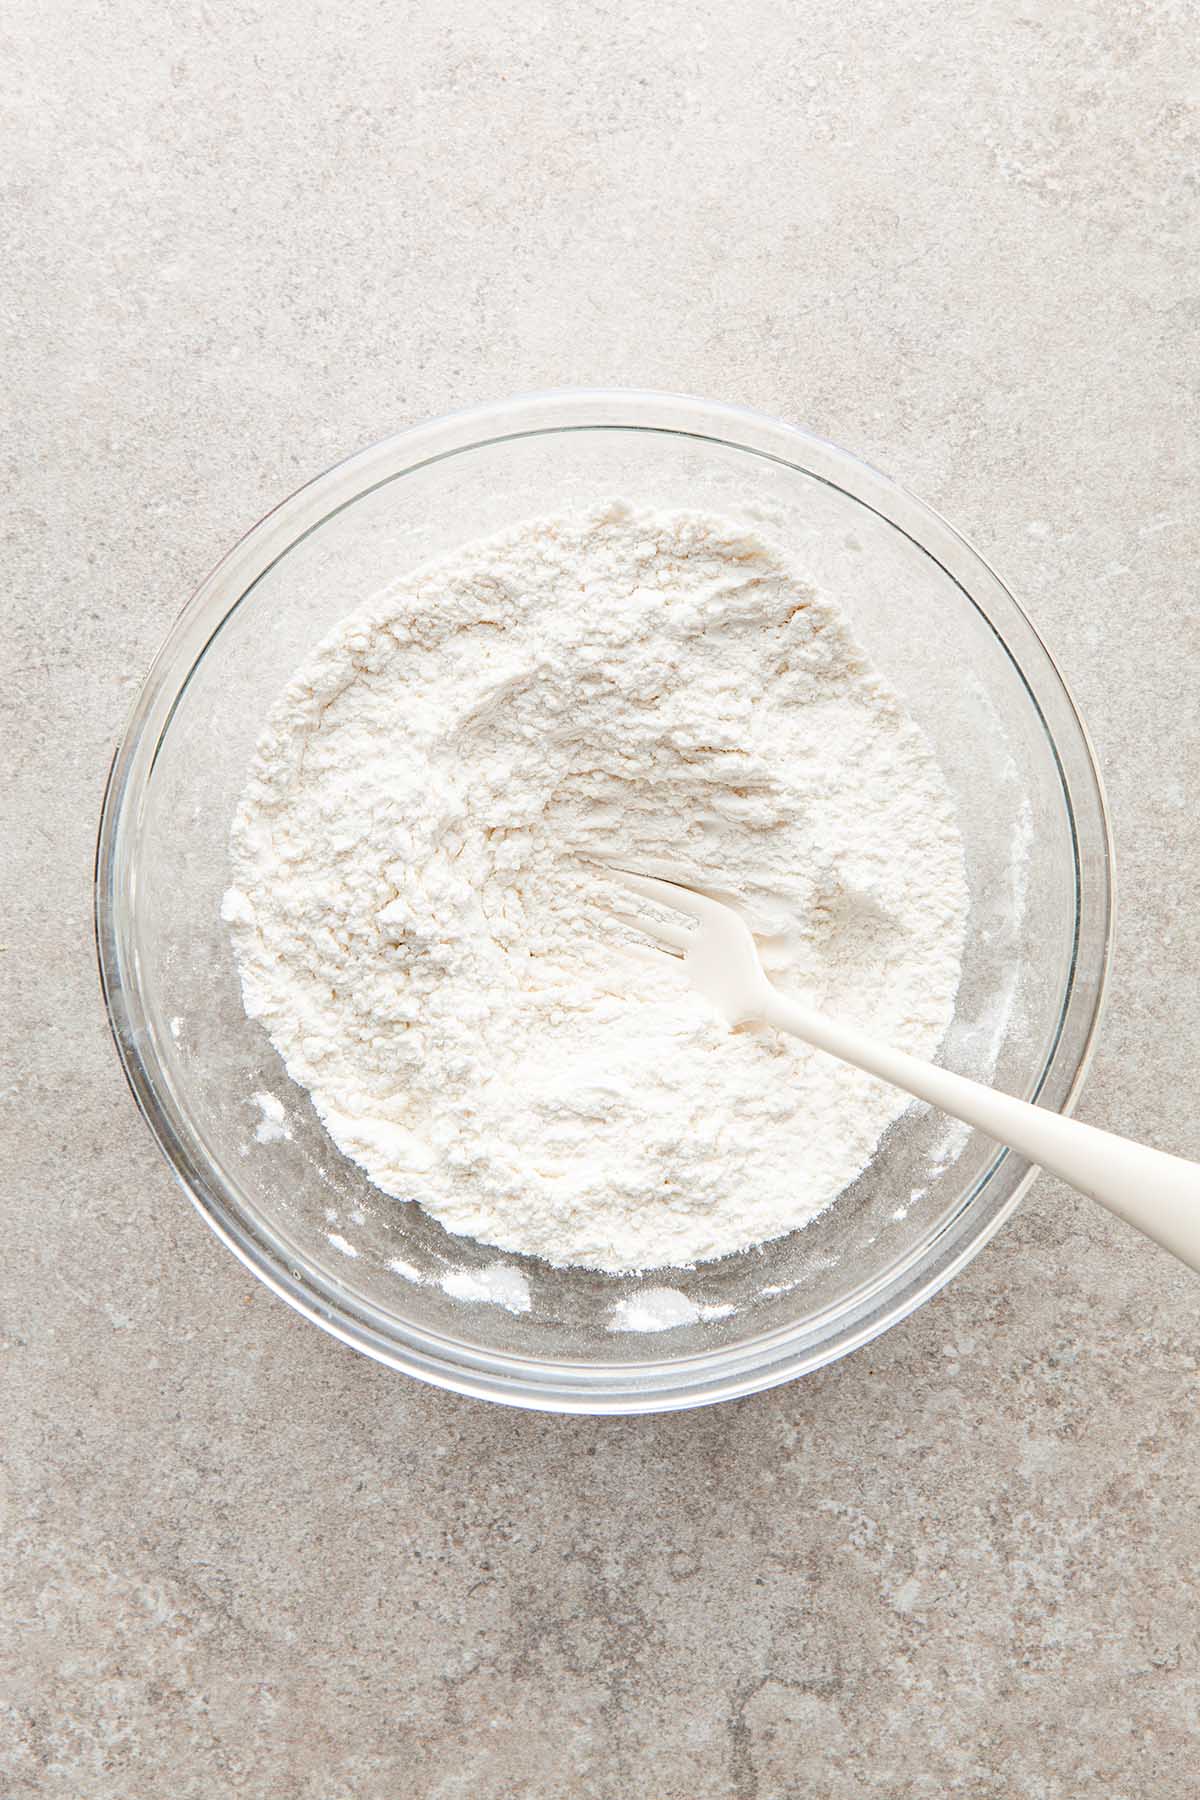 A bowl of flour, baking poweder, baking soda, and salt mixed with a fork.